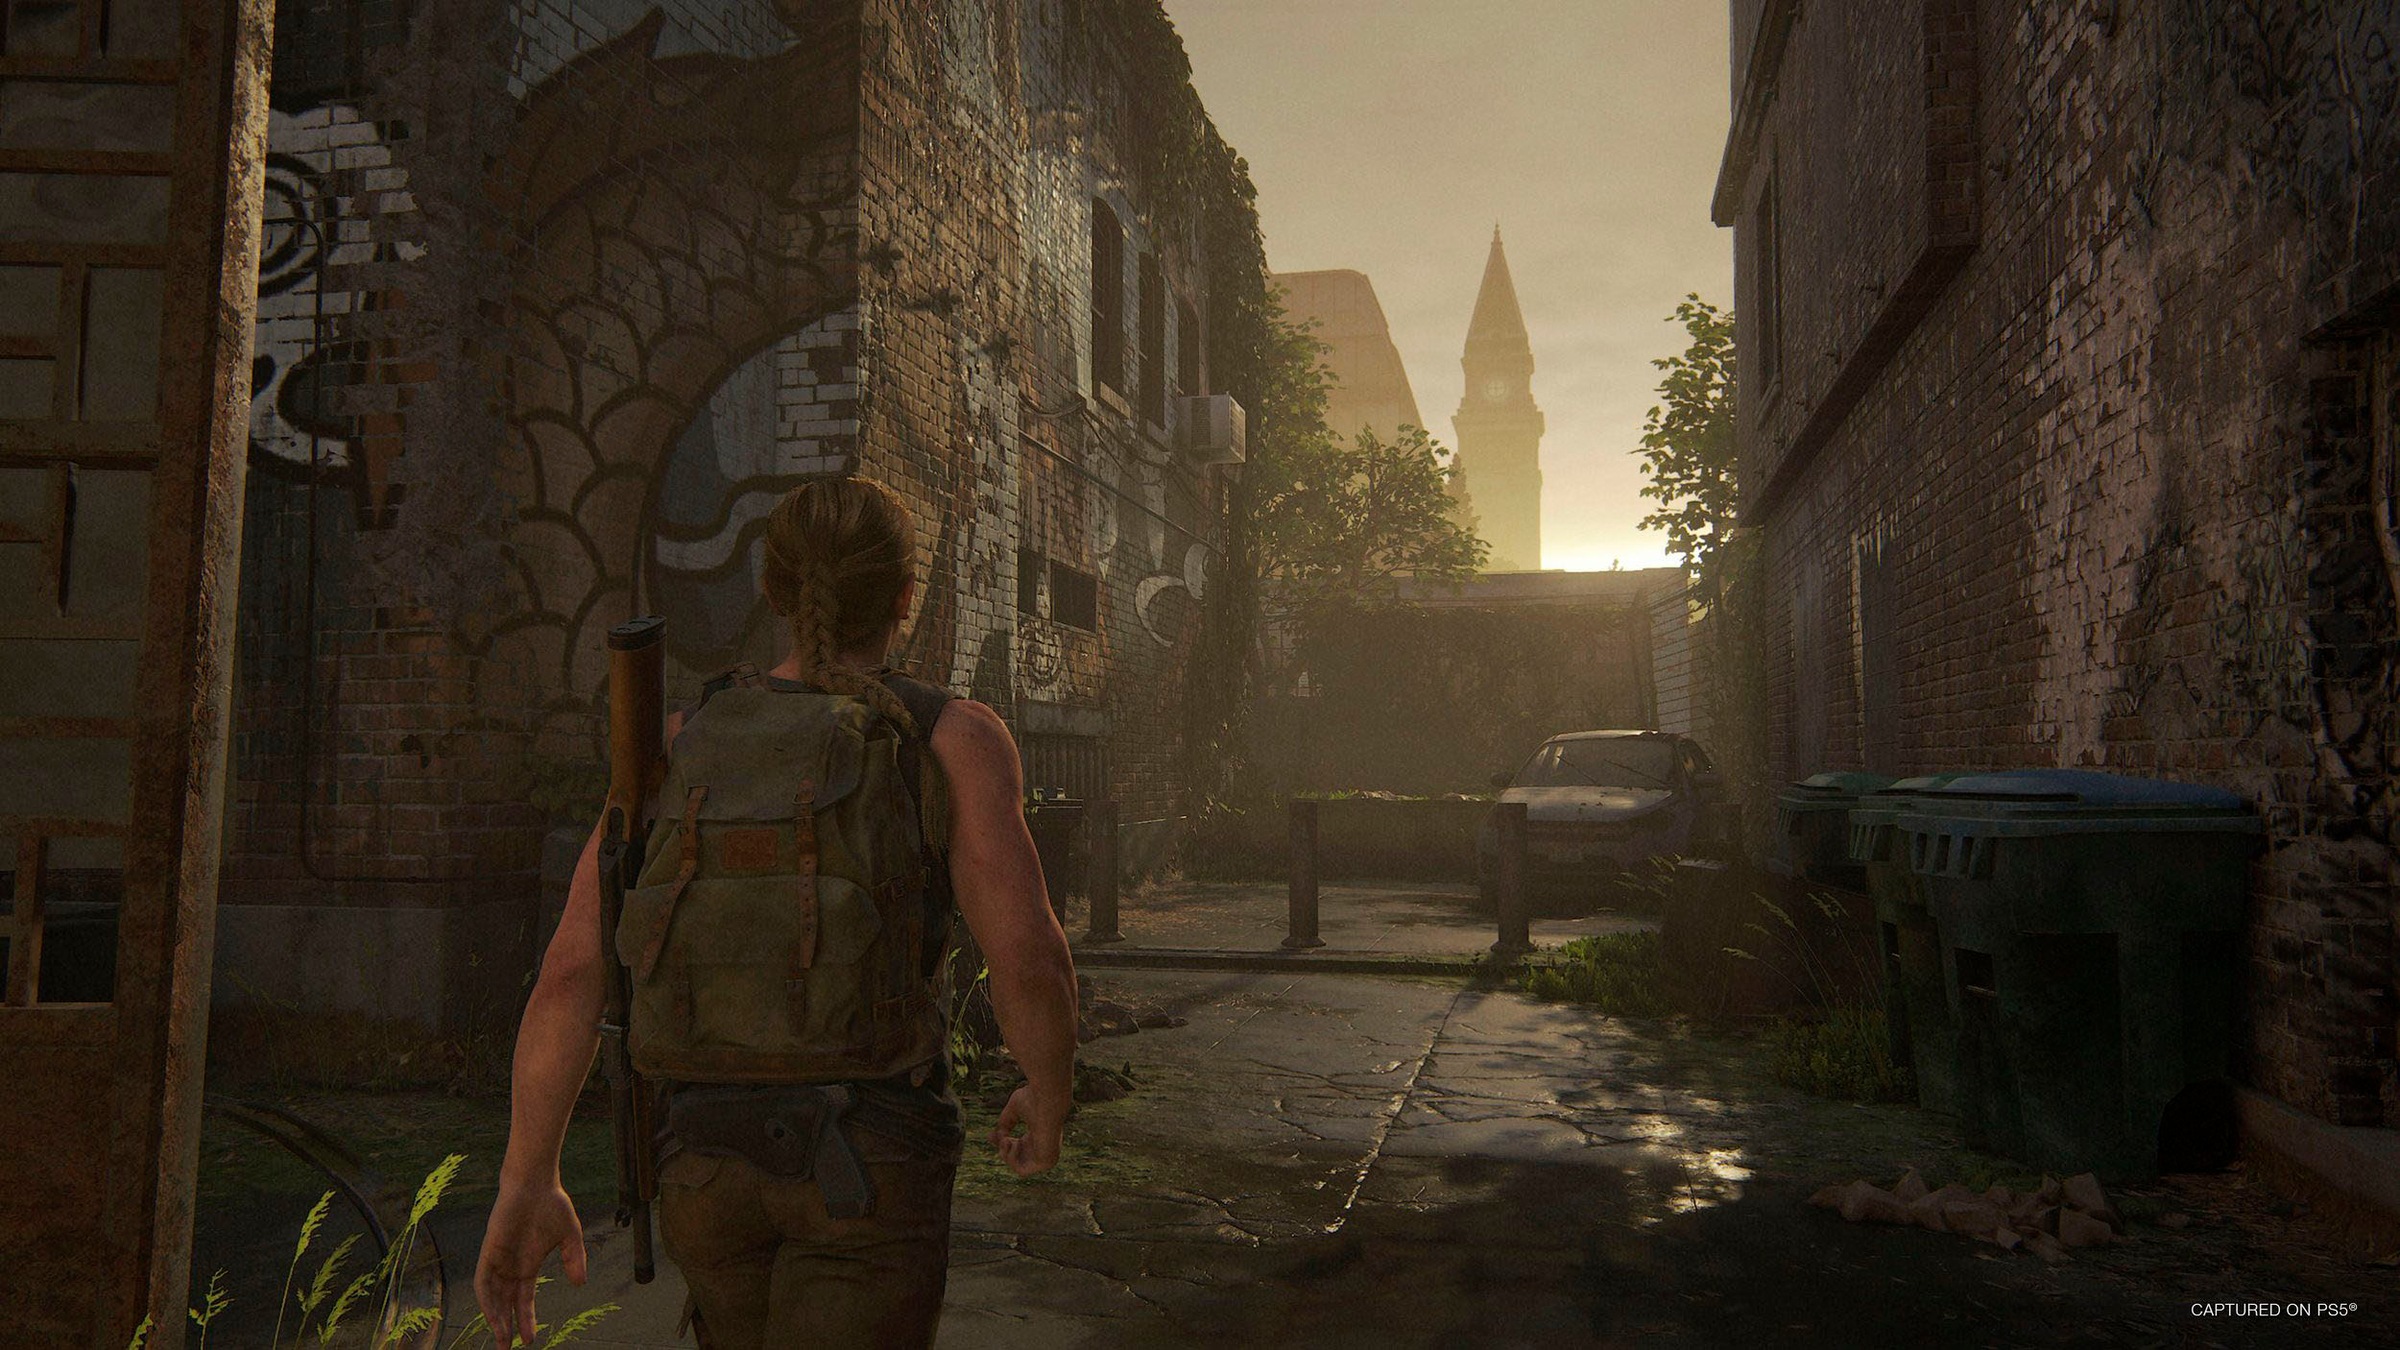 PlayStation 5 Spielekonsole »Disk Edition (Slim) + The Last of Us Part II Remastered«